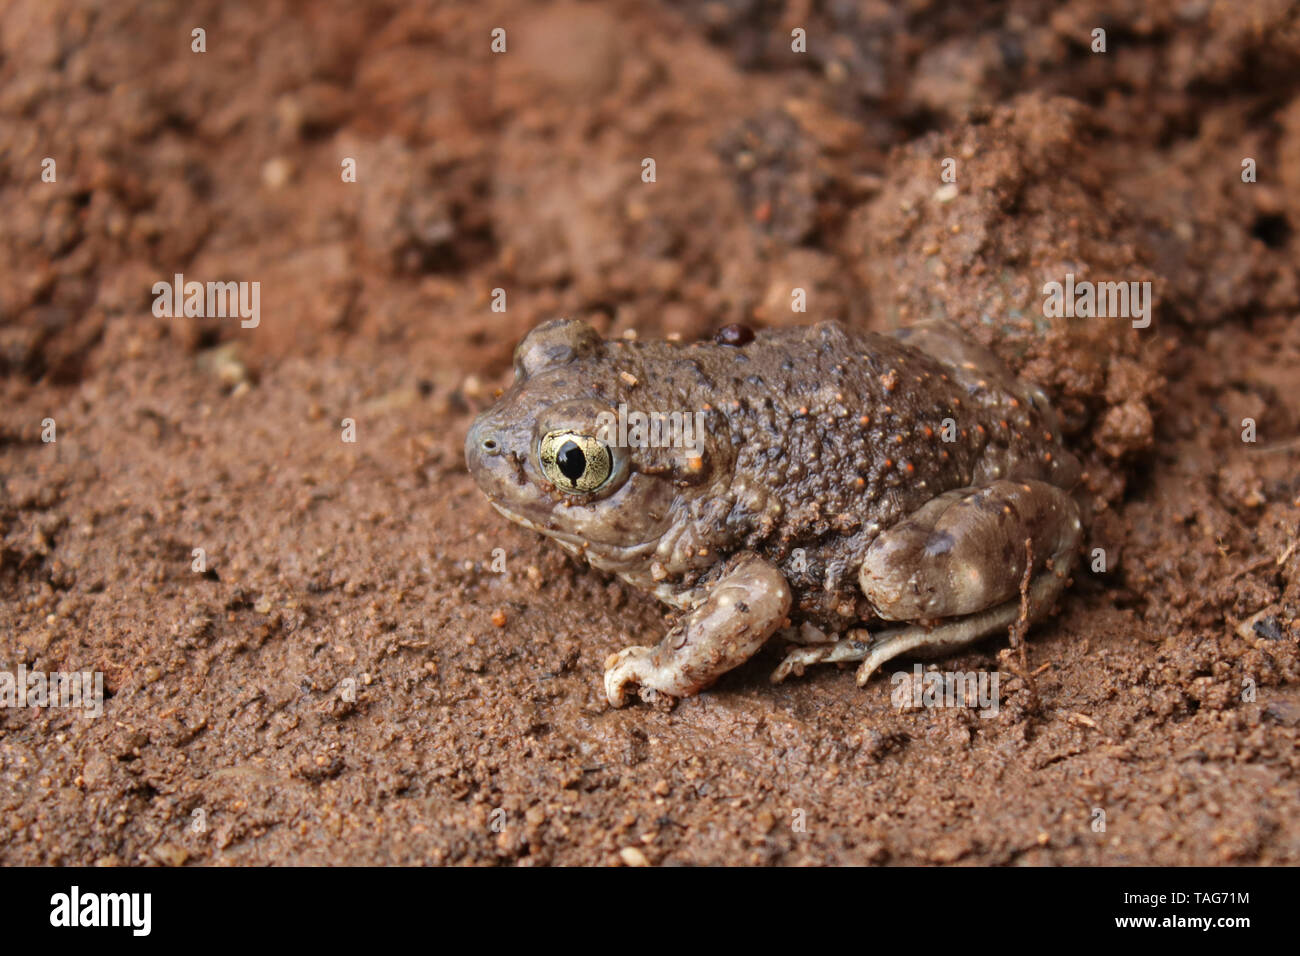 Mexican Spadefoot Toad (Spea multiplicata) Stock Photo